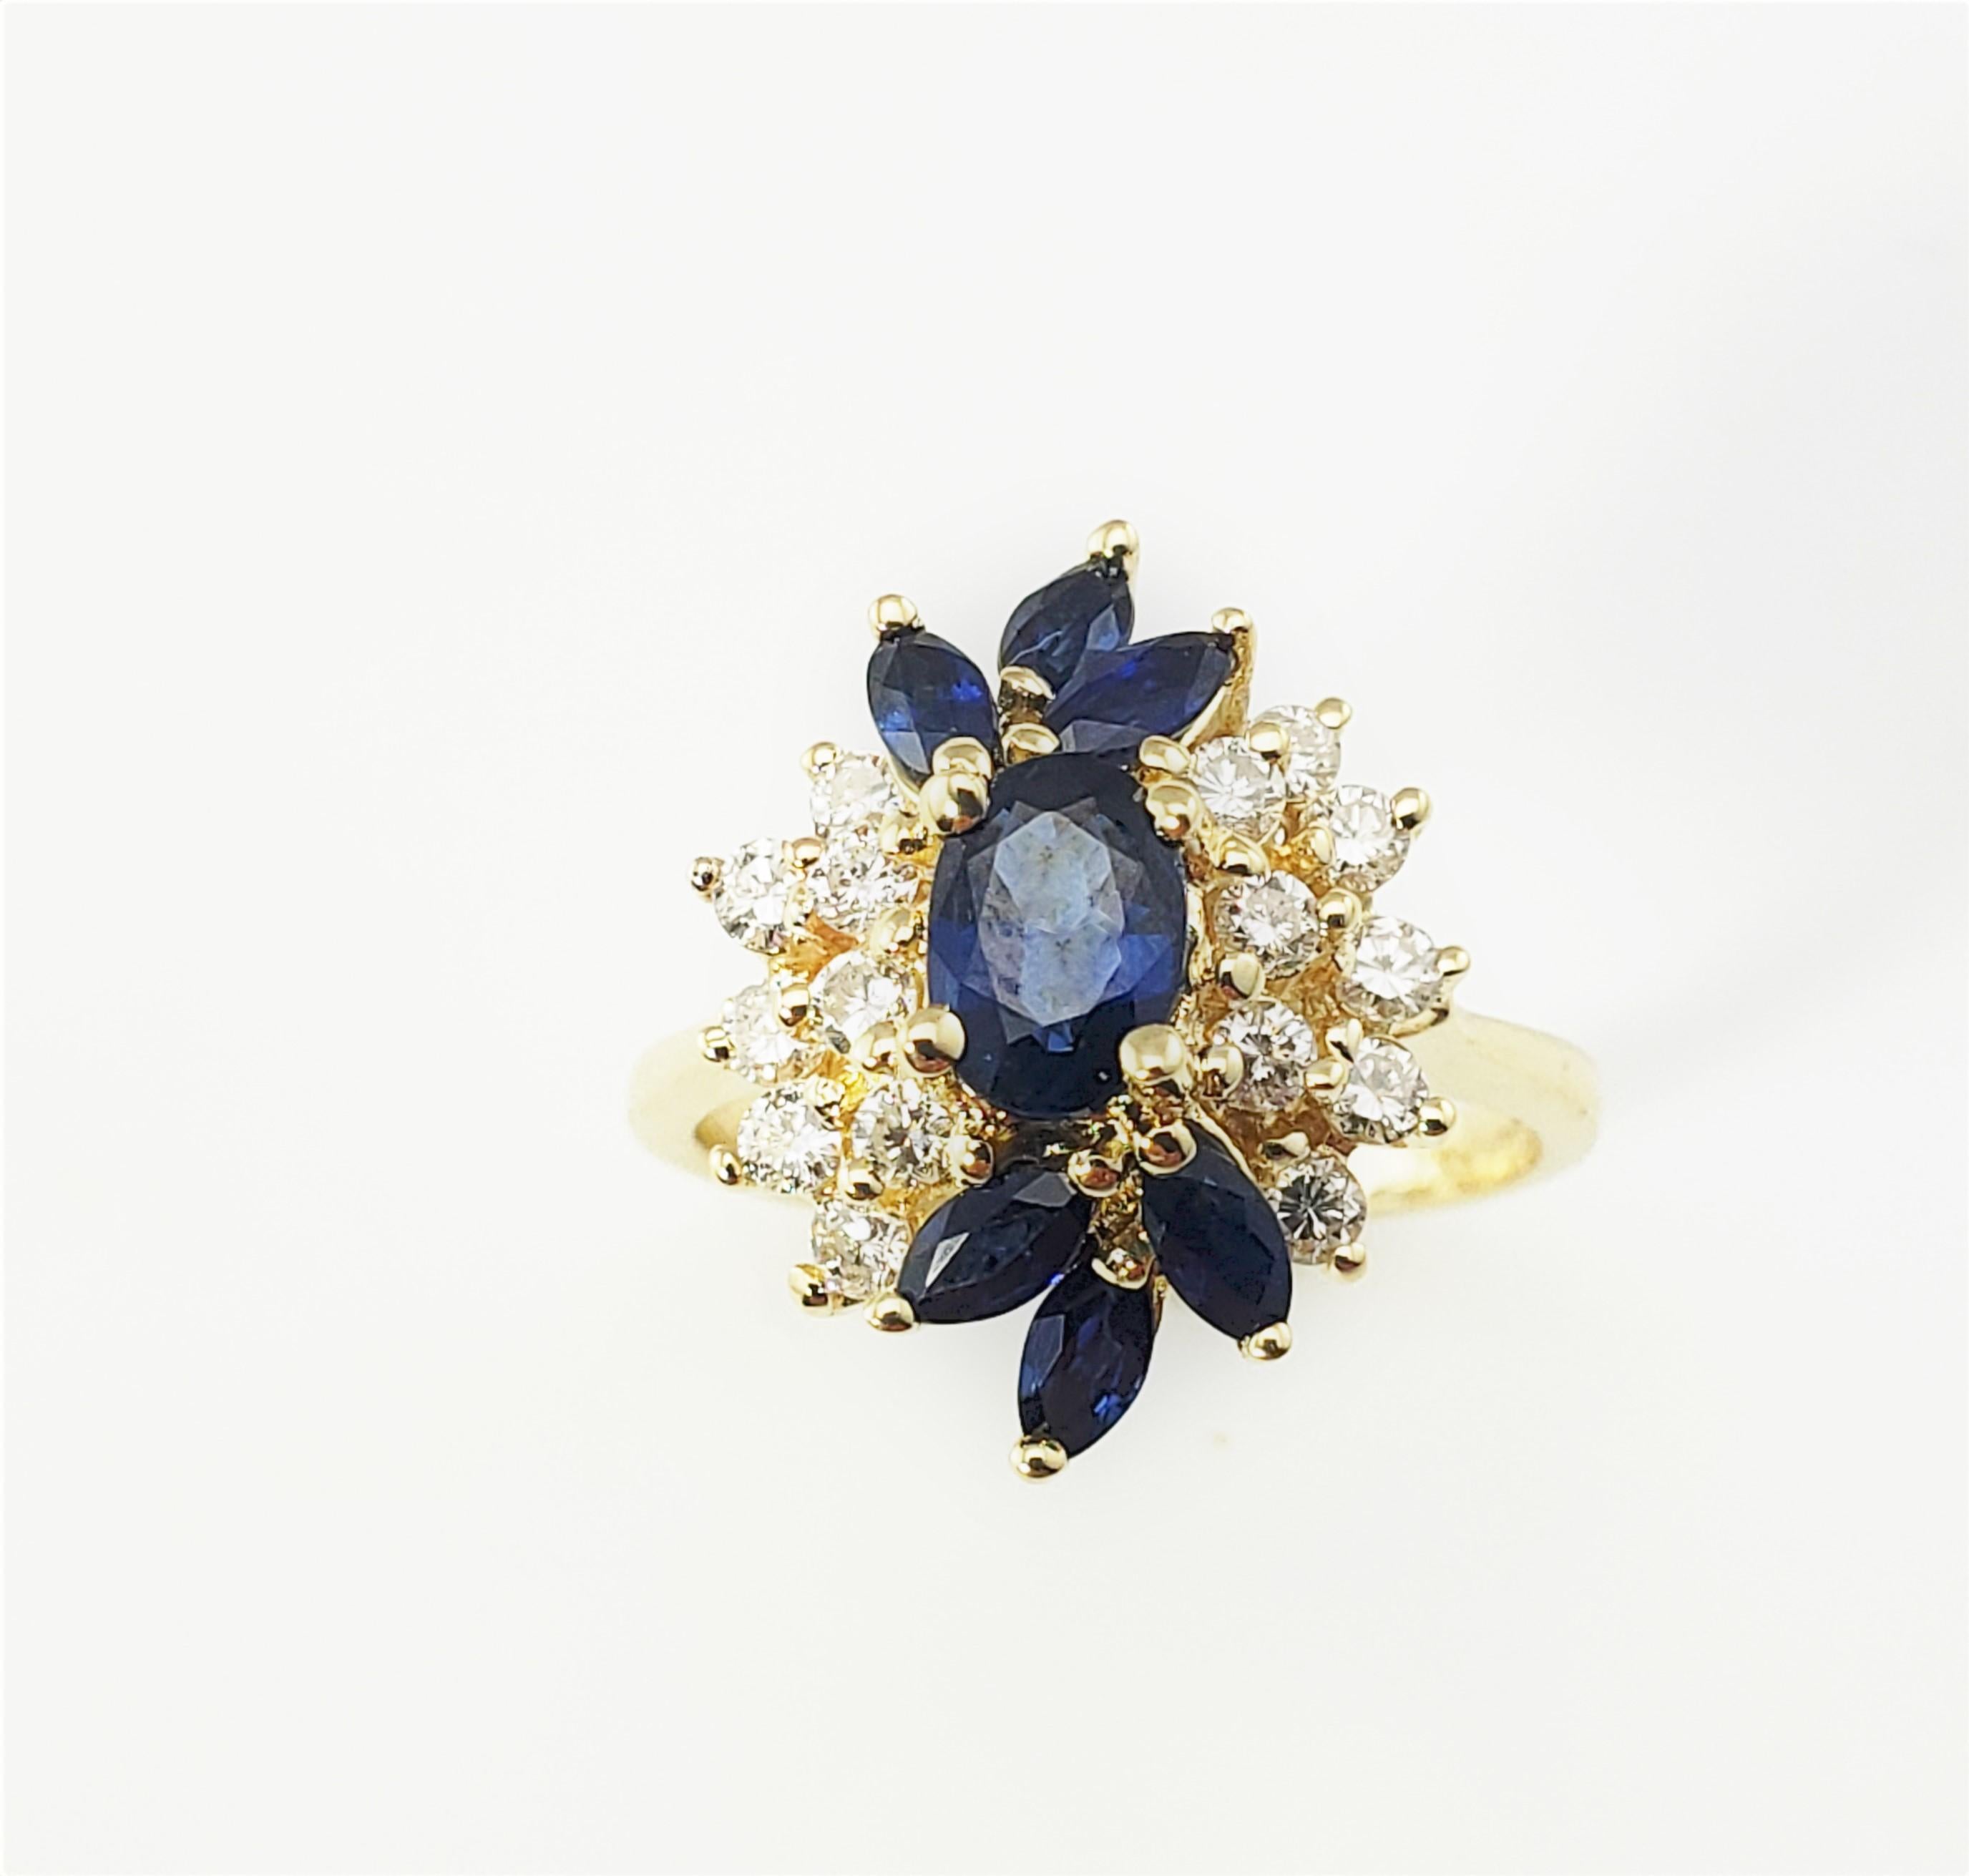 14 Karat Yellow Gold Sapphire and Diamond Ring Size 6.25-

This elegant ring features one oval sapphire, six marquis sapphires and 16 round brilliant cut diamonds set in classic 14K yellow gold.  Top of ring measures 17 mm x 14 mm.  Shank measures 2